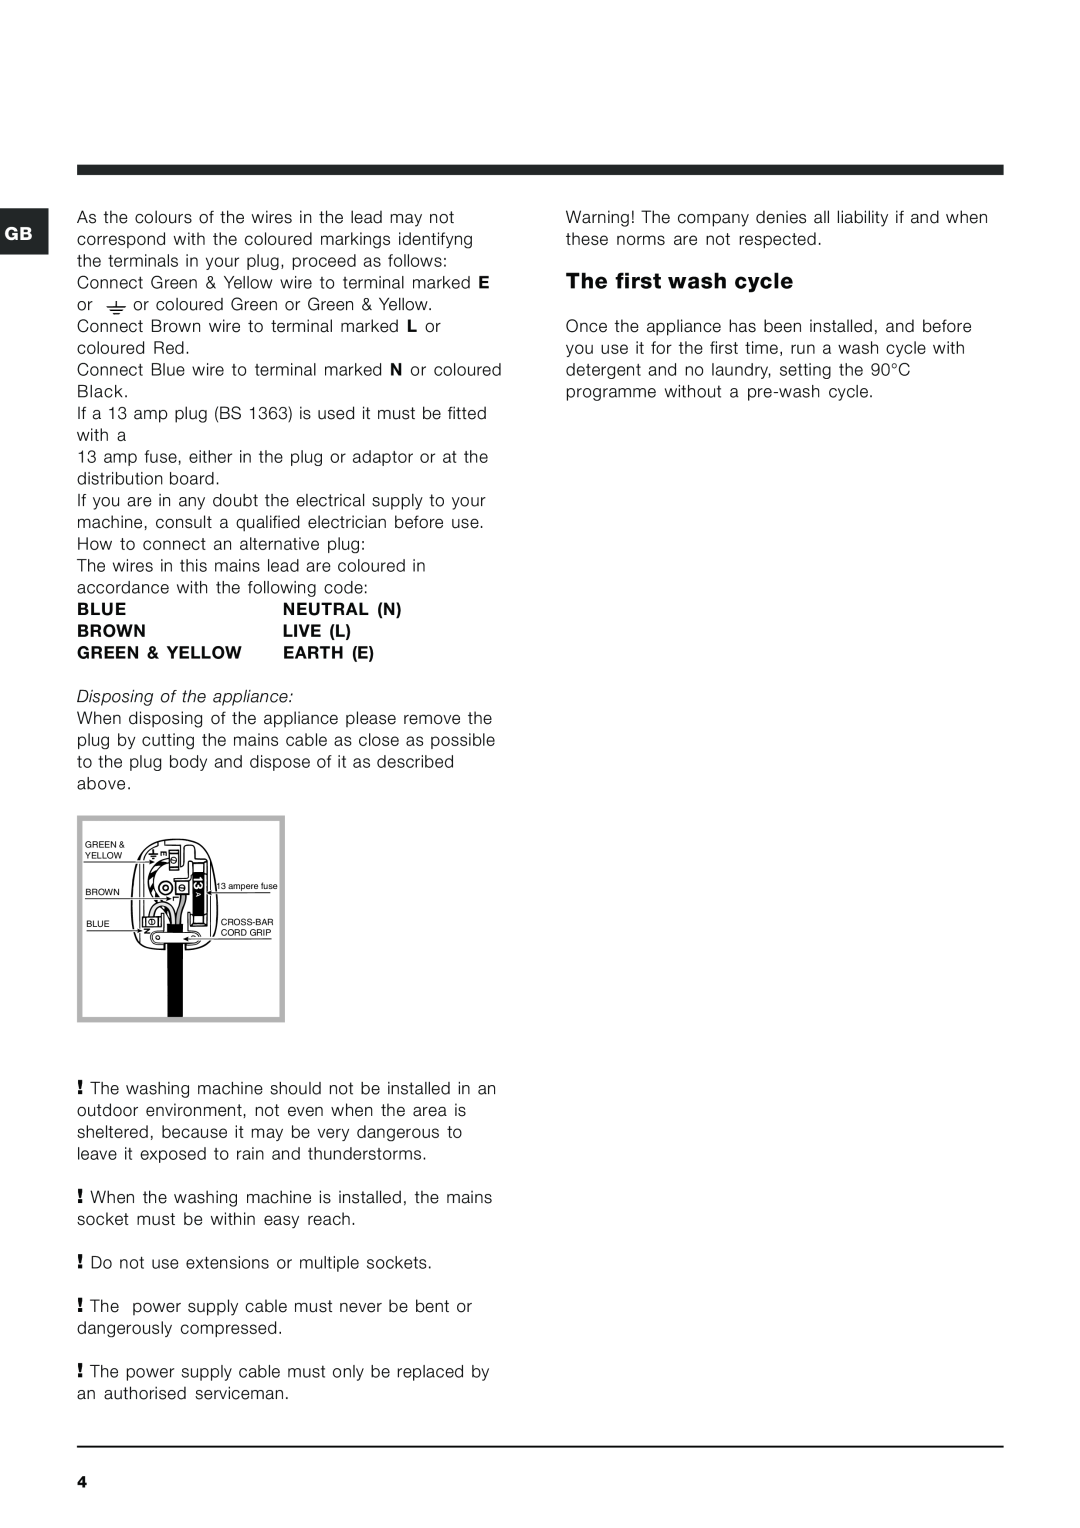 Indesit IWE7168 manual The first wash cycle 